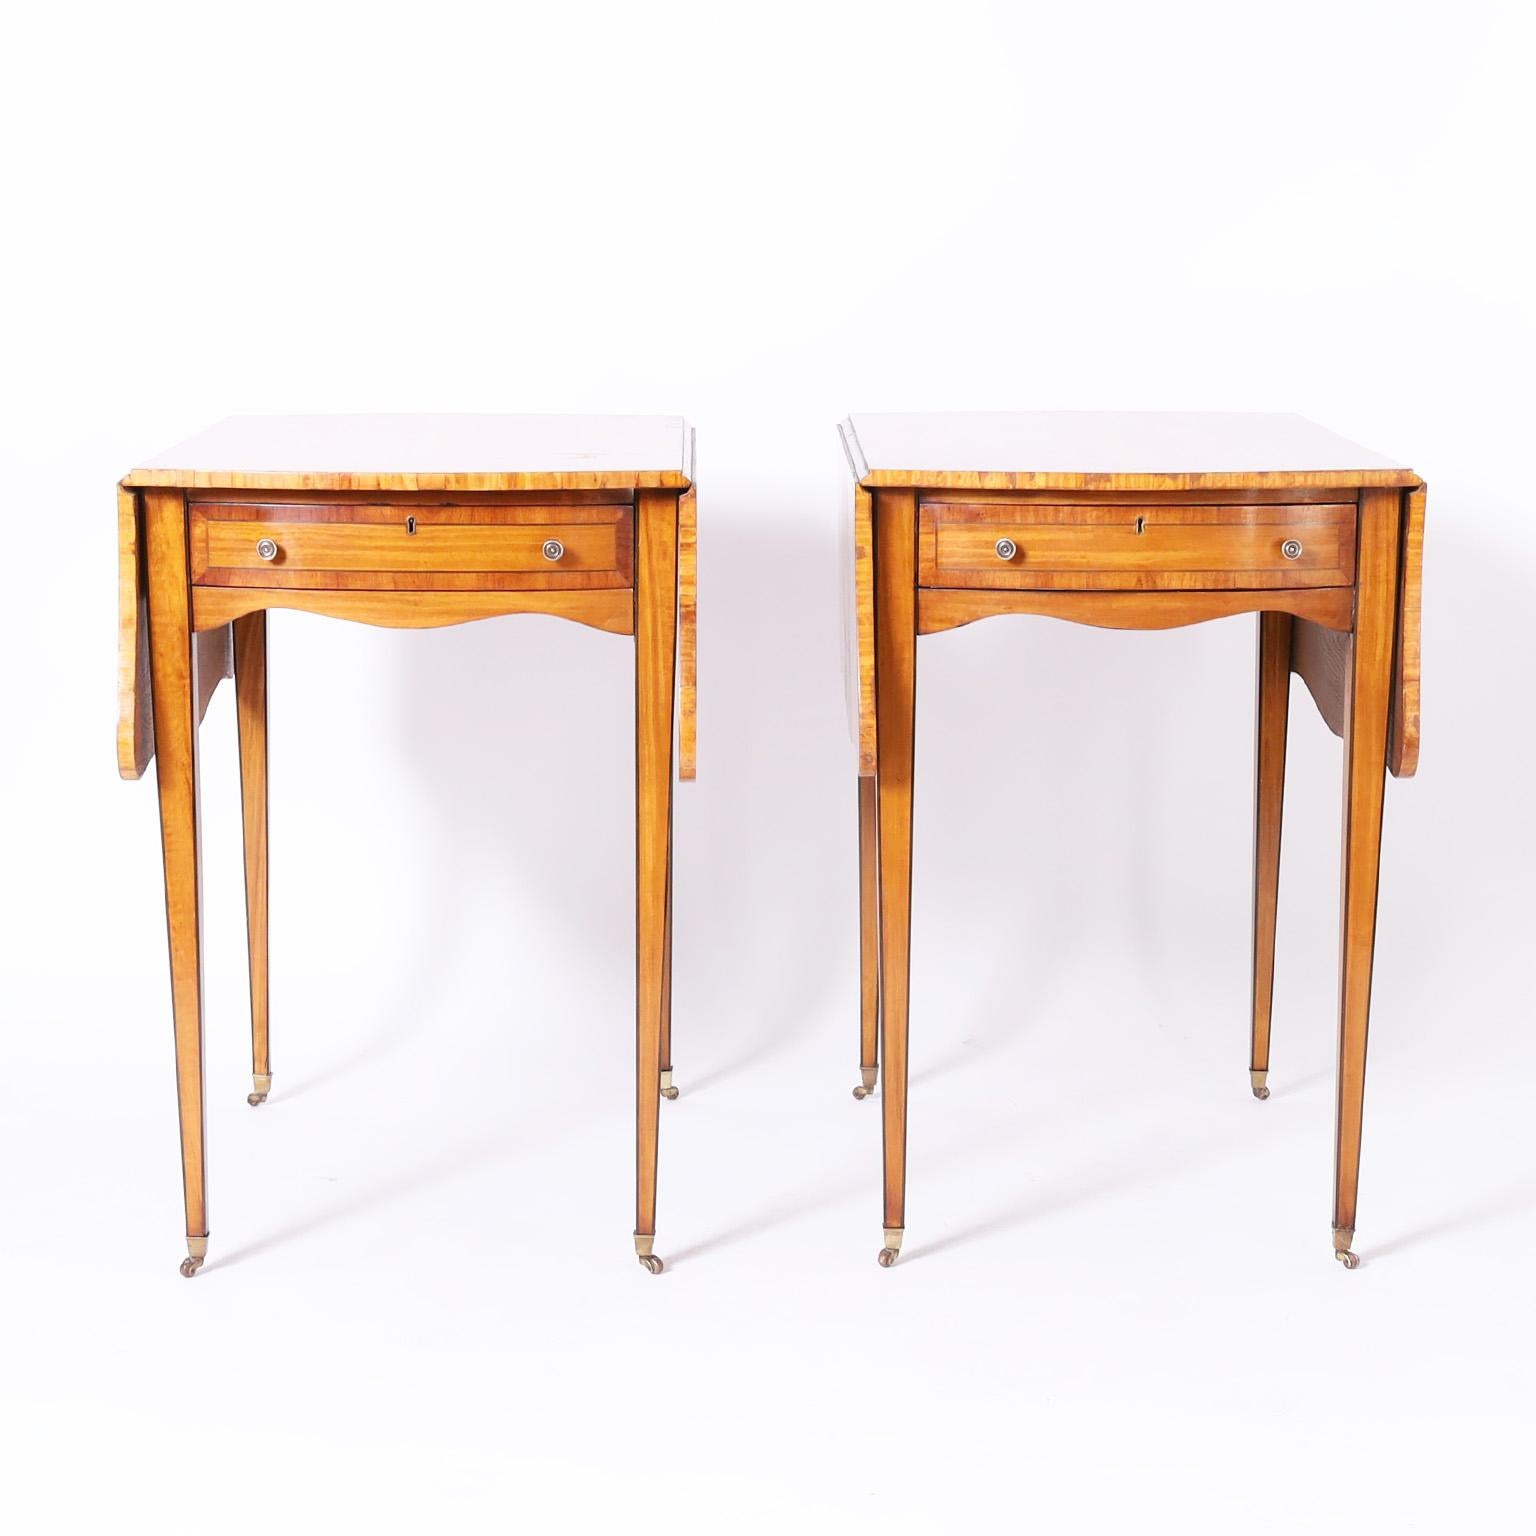 Antique pair of English George III style tables crafted in satinwood with mahogany cross banding in a drop leaf form with one drawer, brass hardware, and long elegant legs on brass casters.

Closed depth: 32